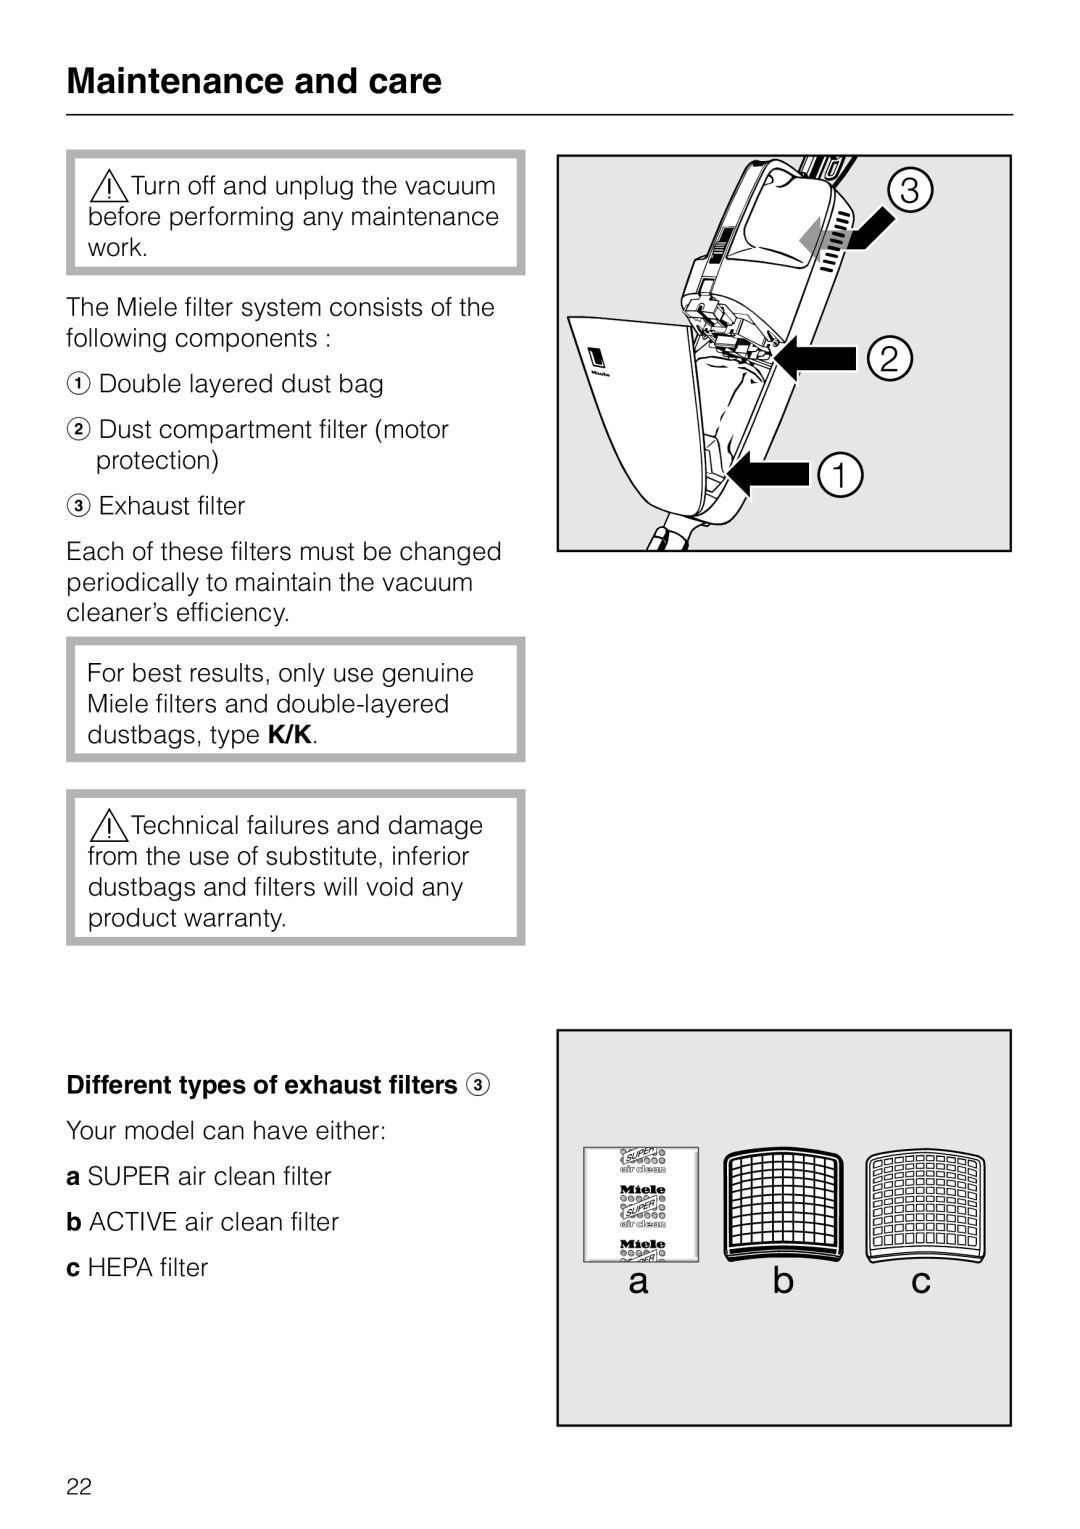 Miele S 140 S 160 manual Maintenance and care, Different types of exhaust filters c 